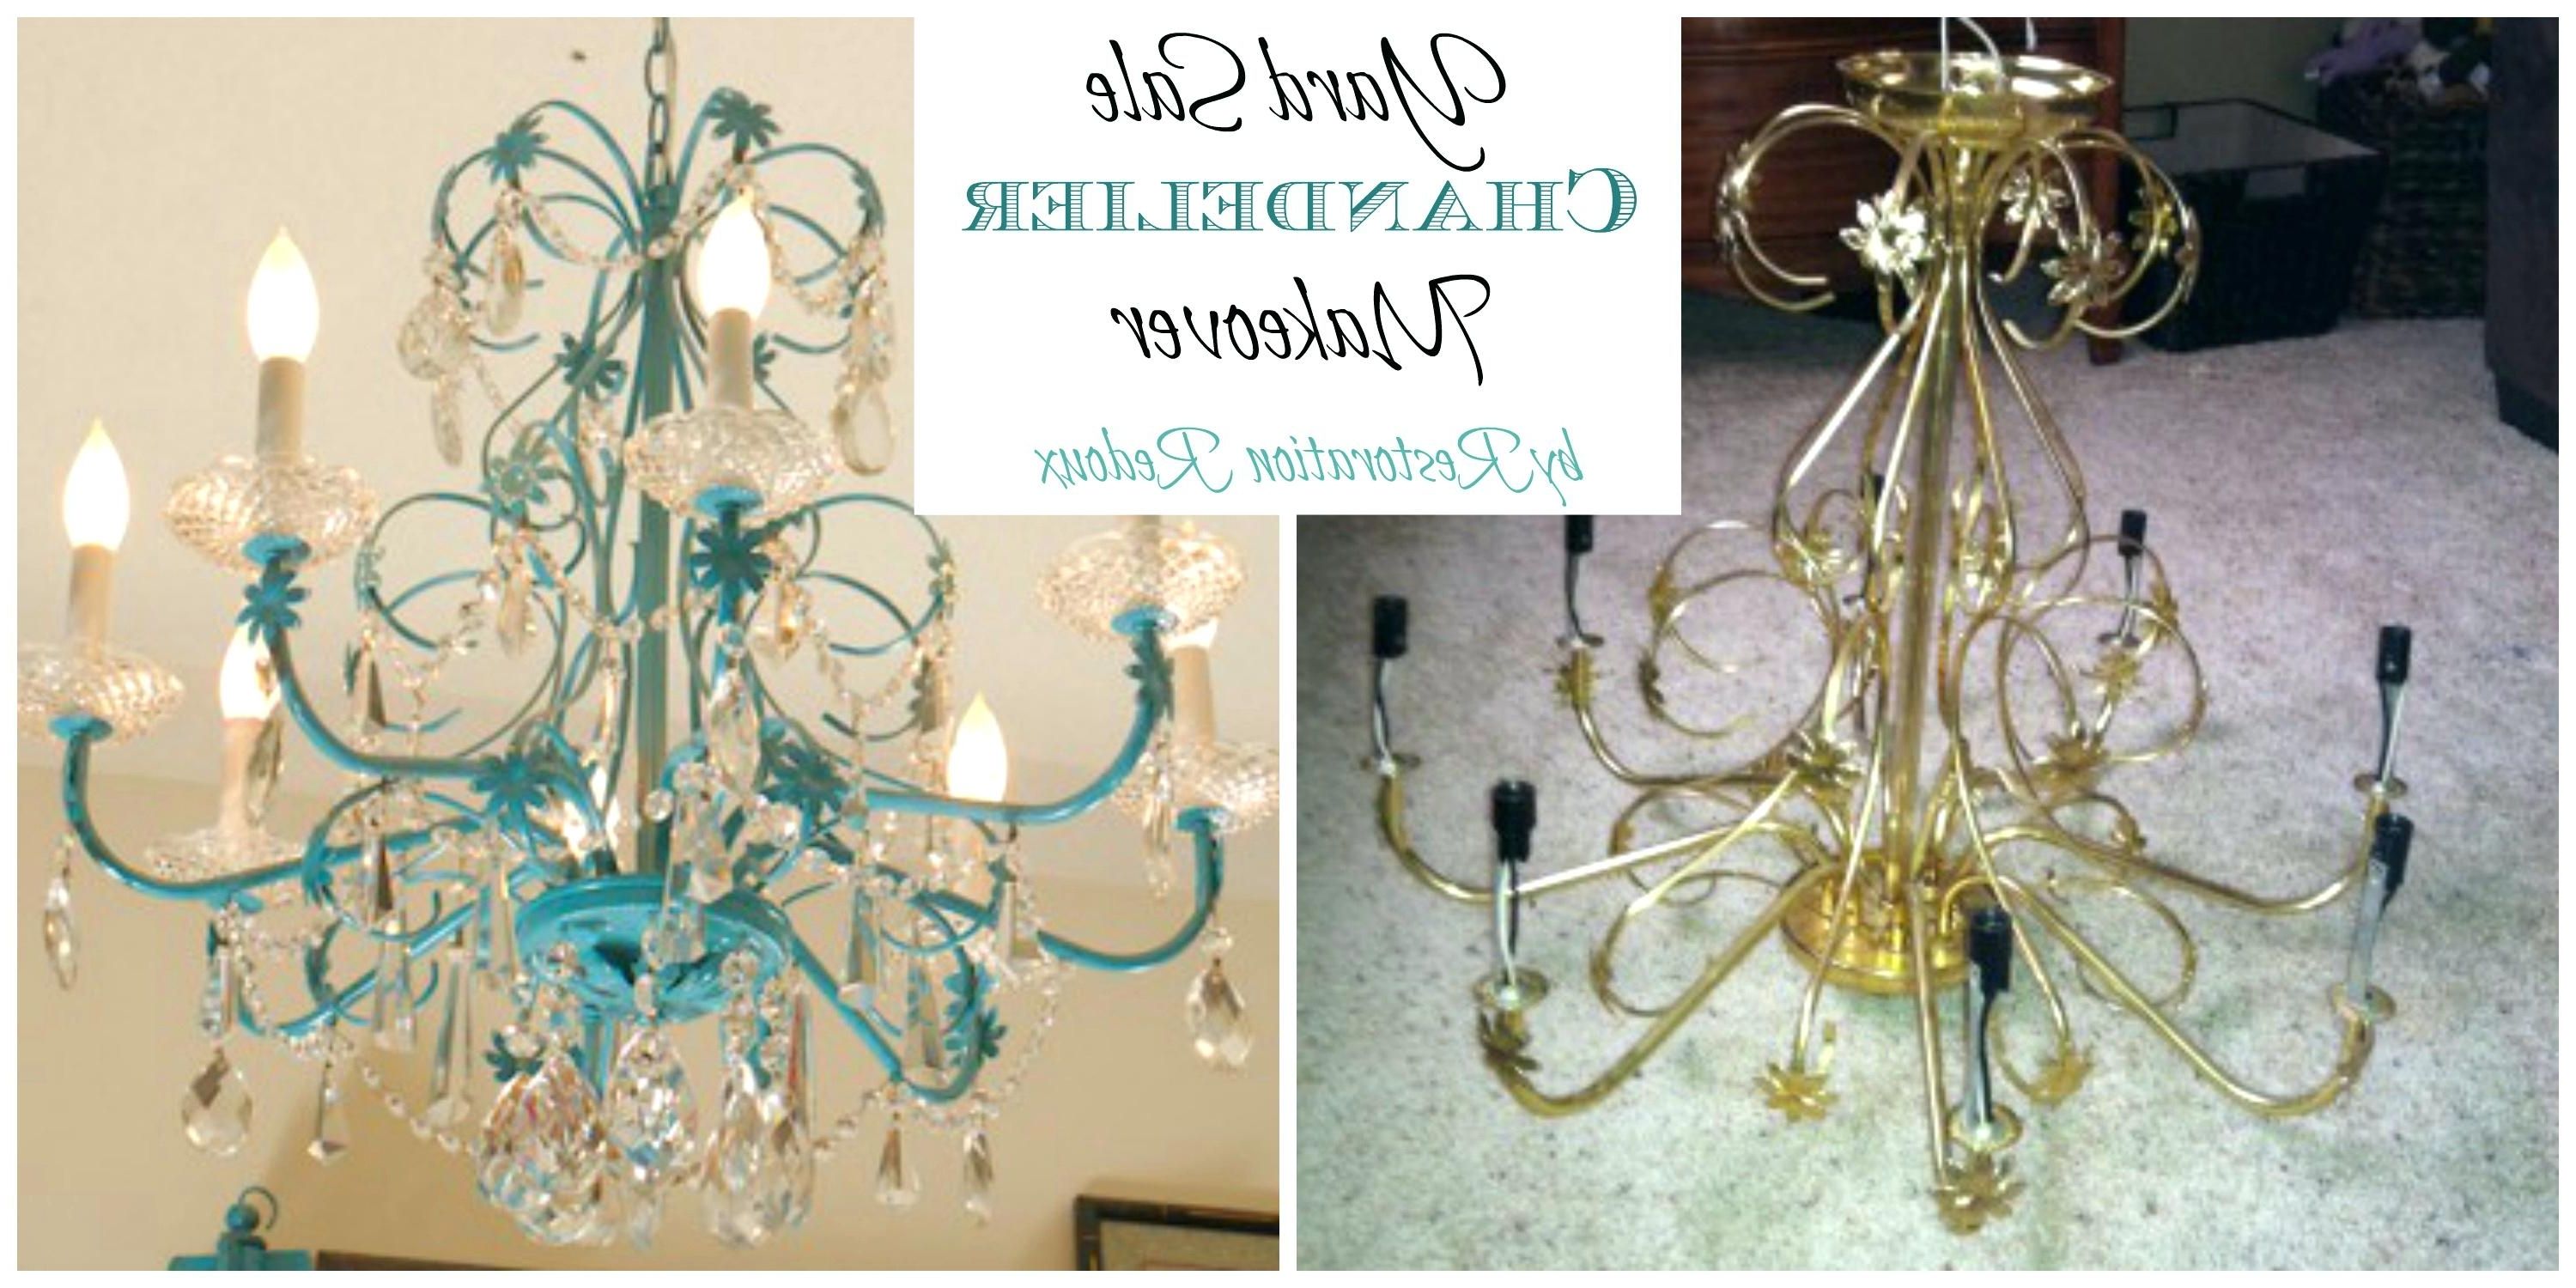 Fashionable Turquoise Stone Chandelier Lighting Pertaining To Articles With Turquoise Stone Chandelier Lighting Tag: Turquoise (View 13 of 15)